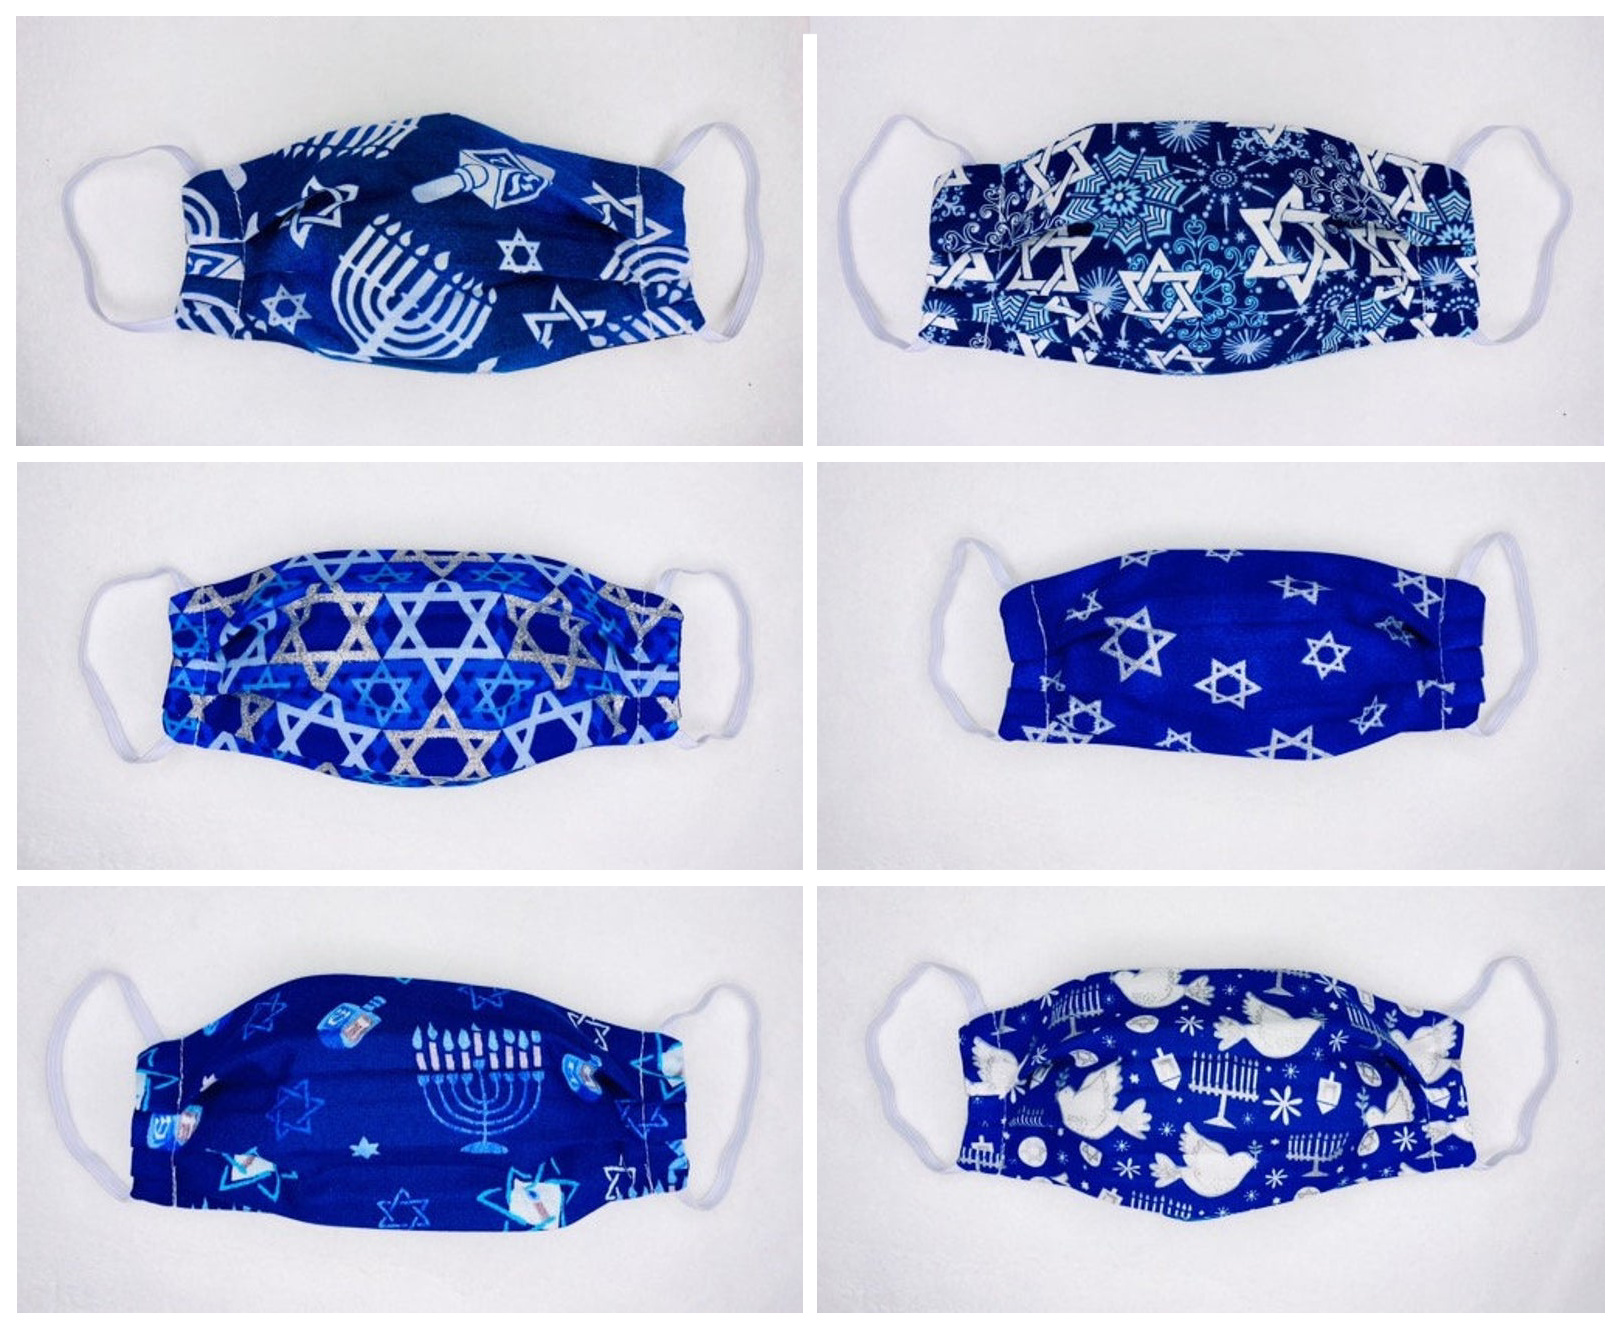 Best Hanukkah gifts from small businesses: Handmade face masks from Momma T's